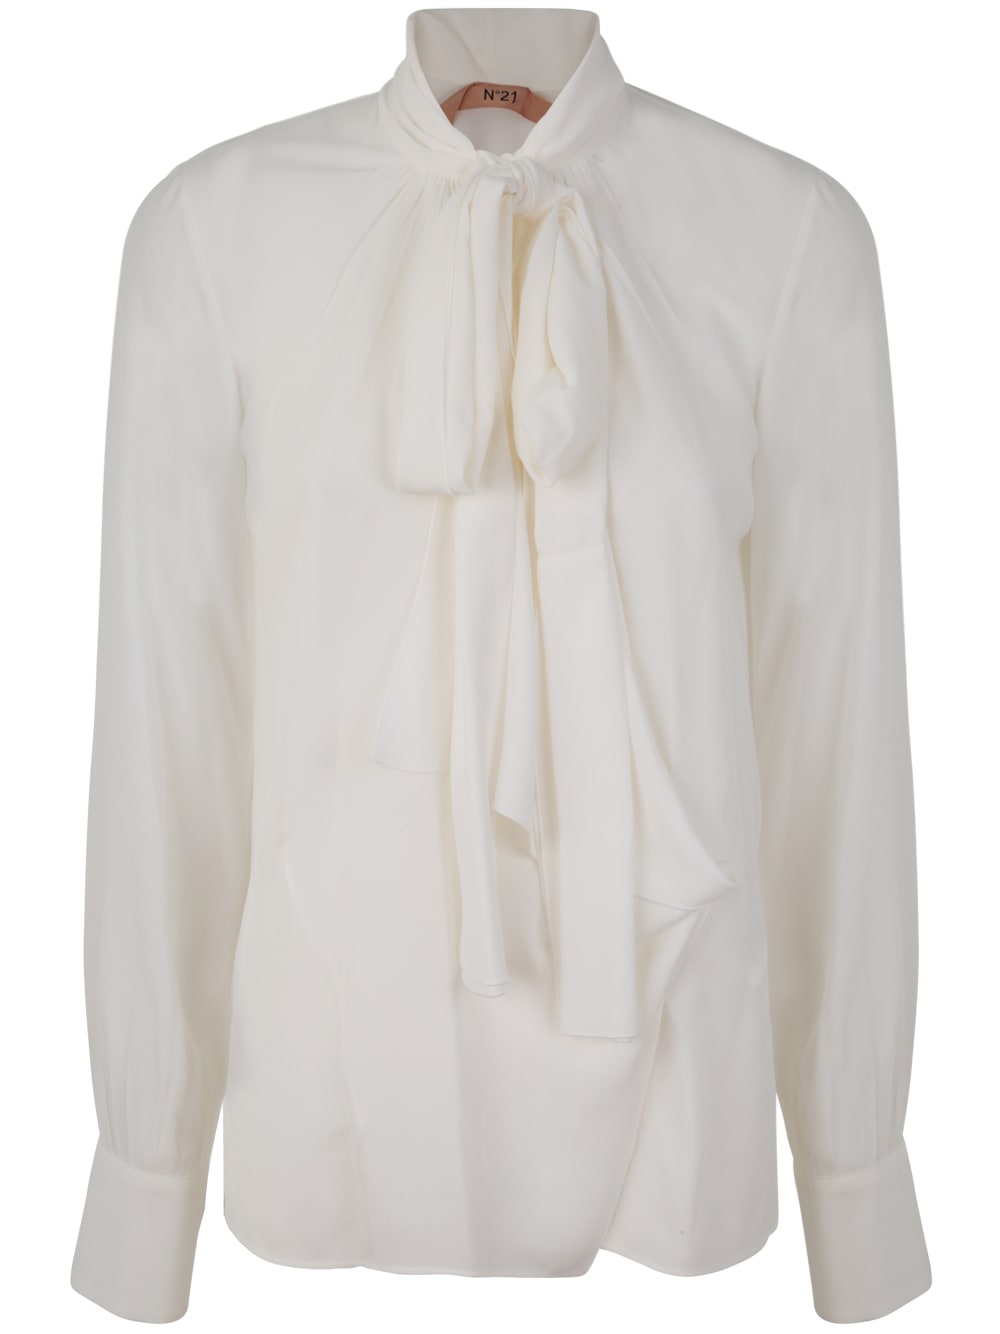 N°21 SHIRT WITH SCARF